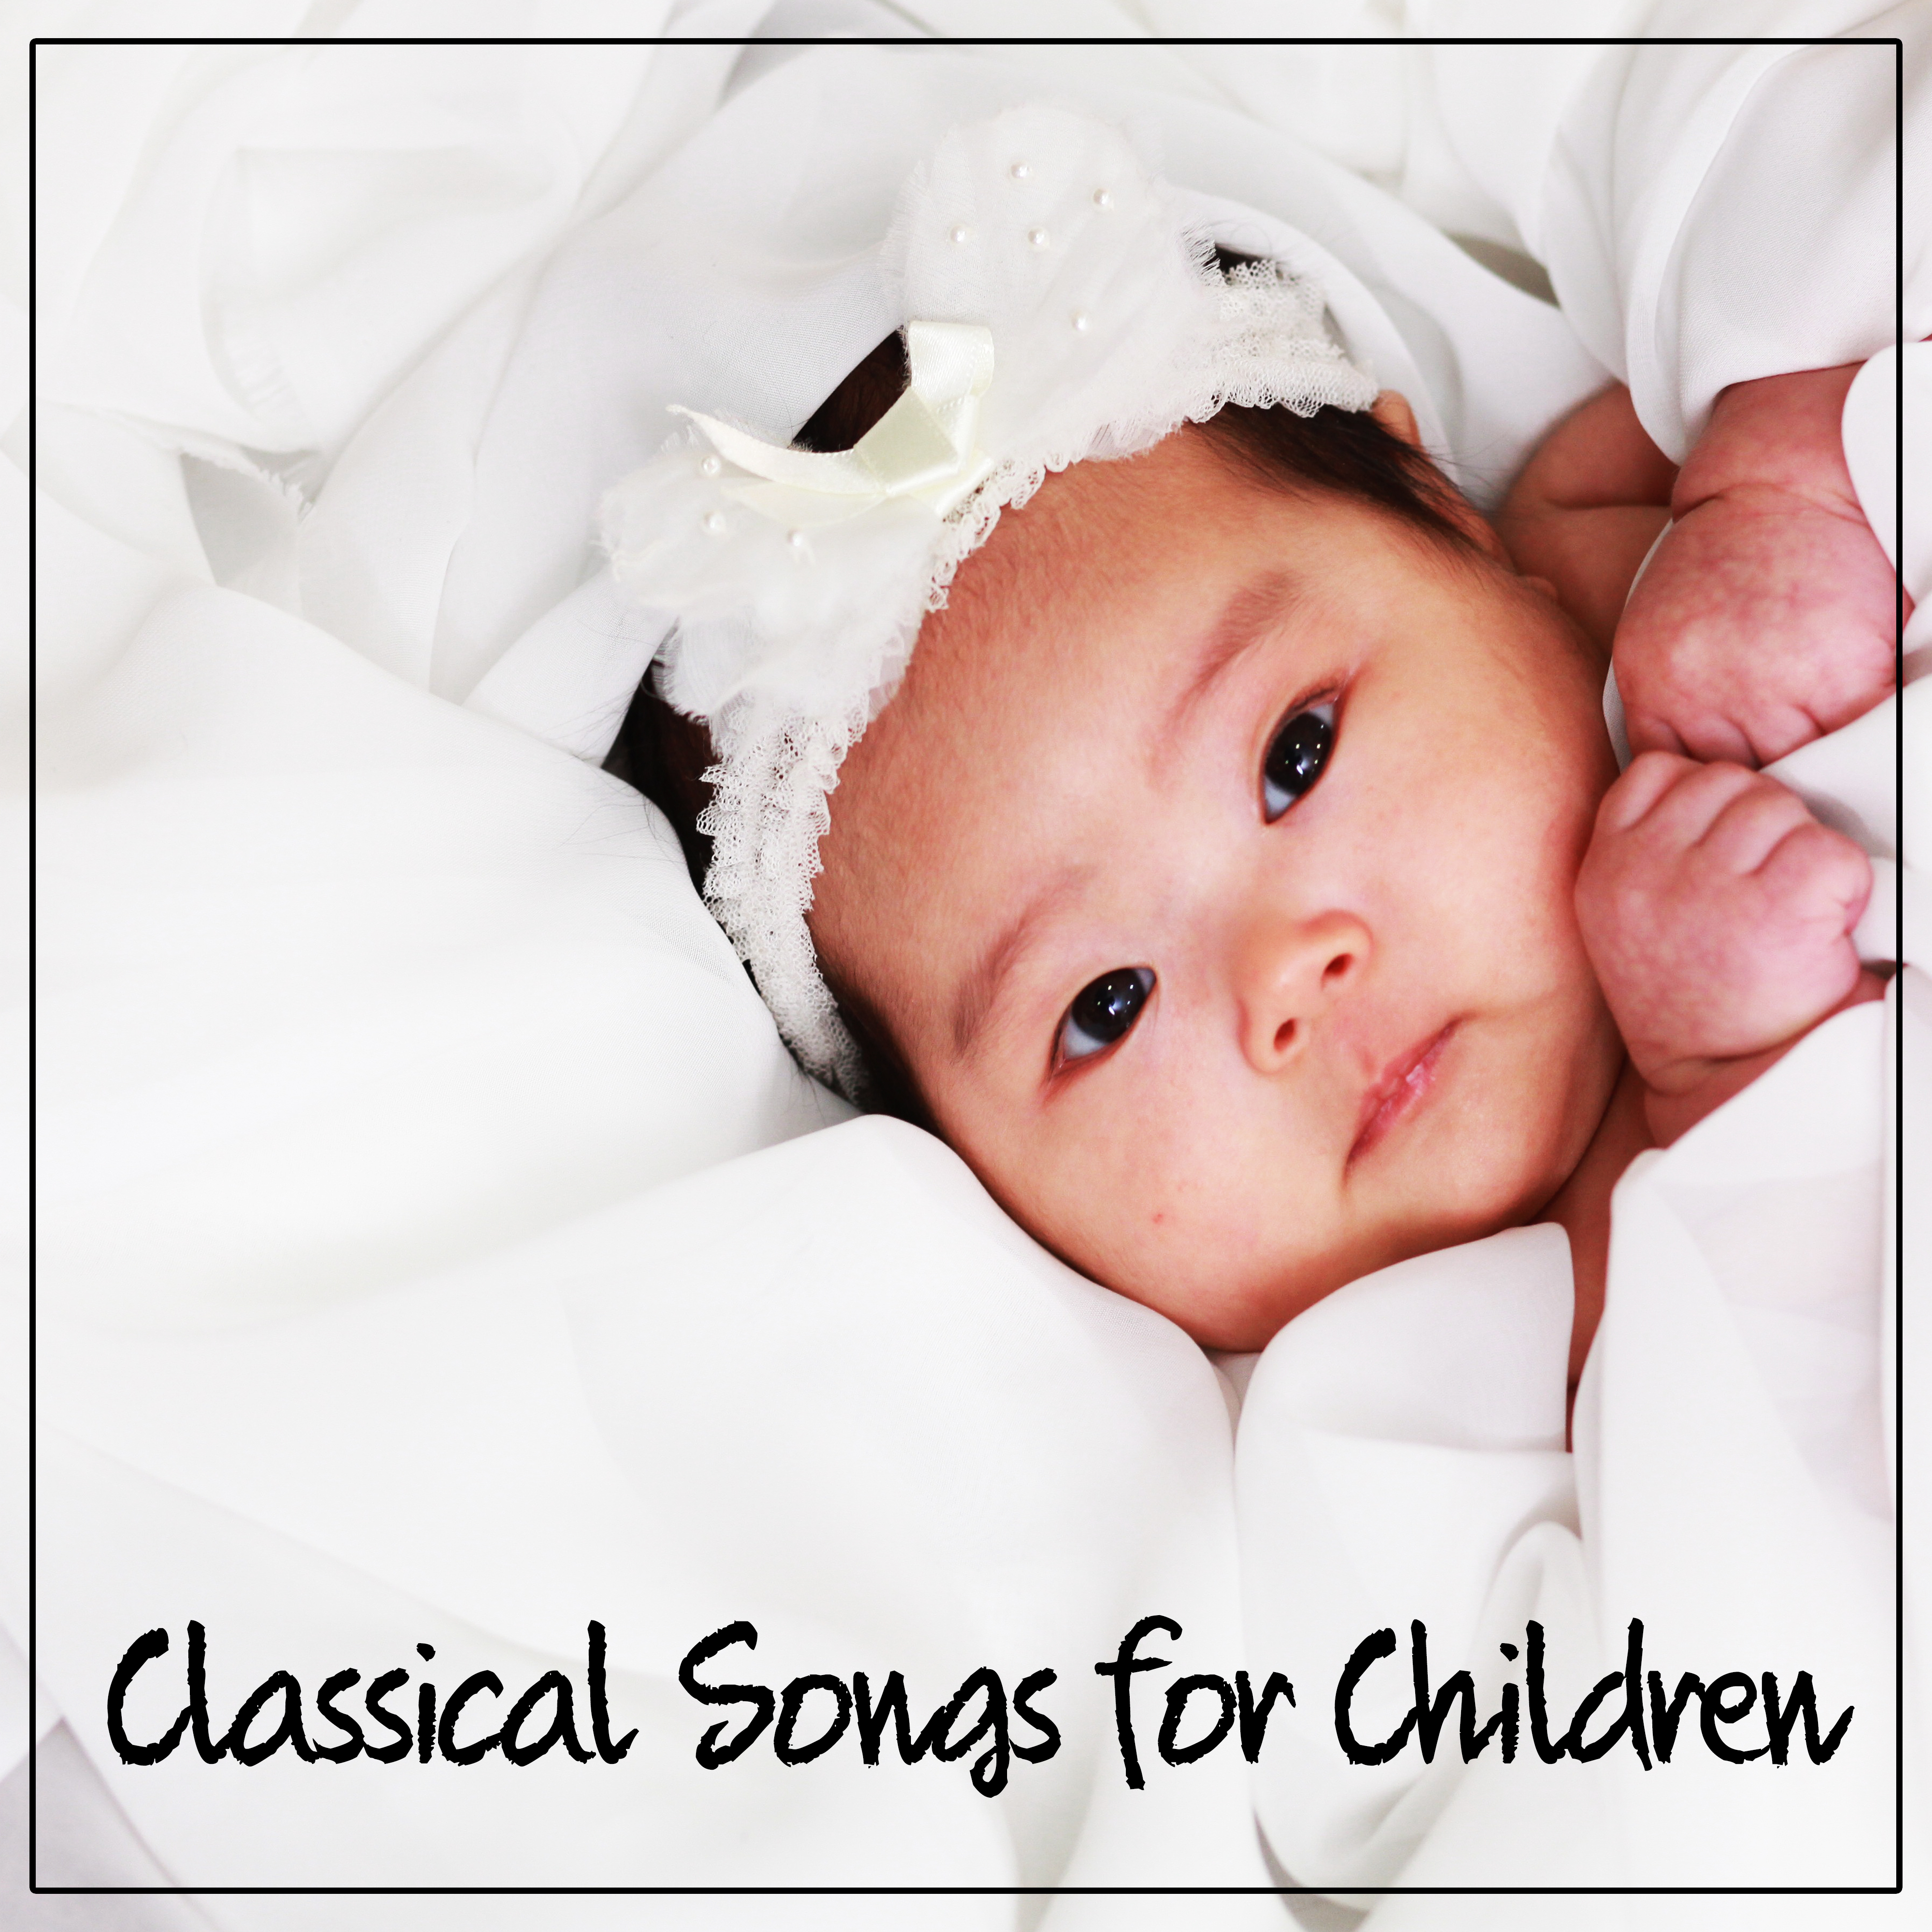 Classical Songs for Children  Toddler Melodies, Quiet Child, Inspiring Music for Baby, Mozart for Your Baby